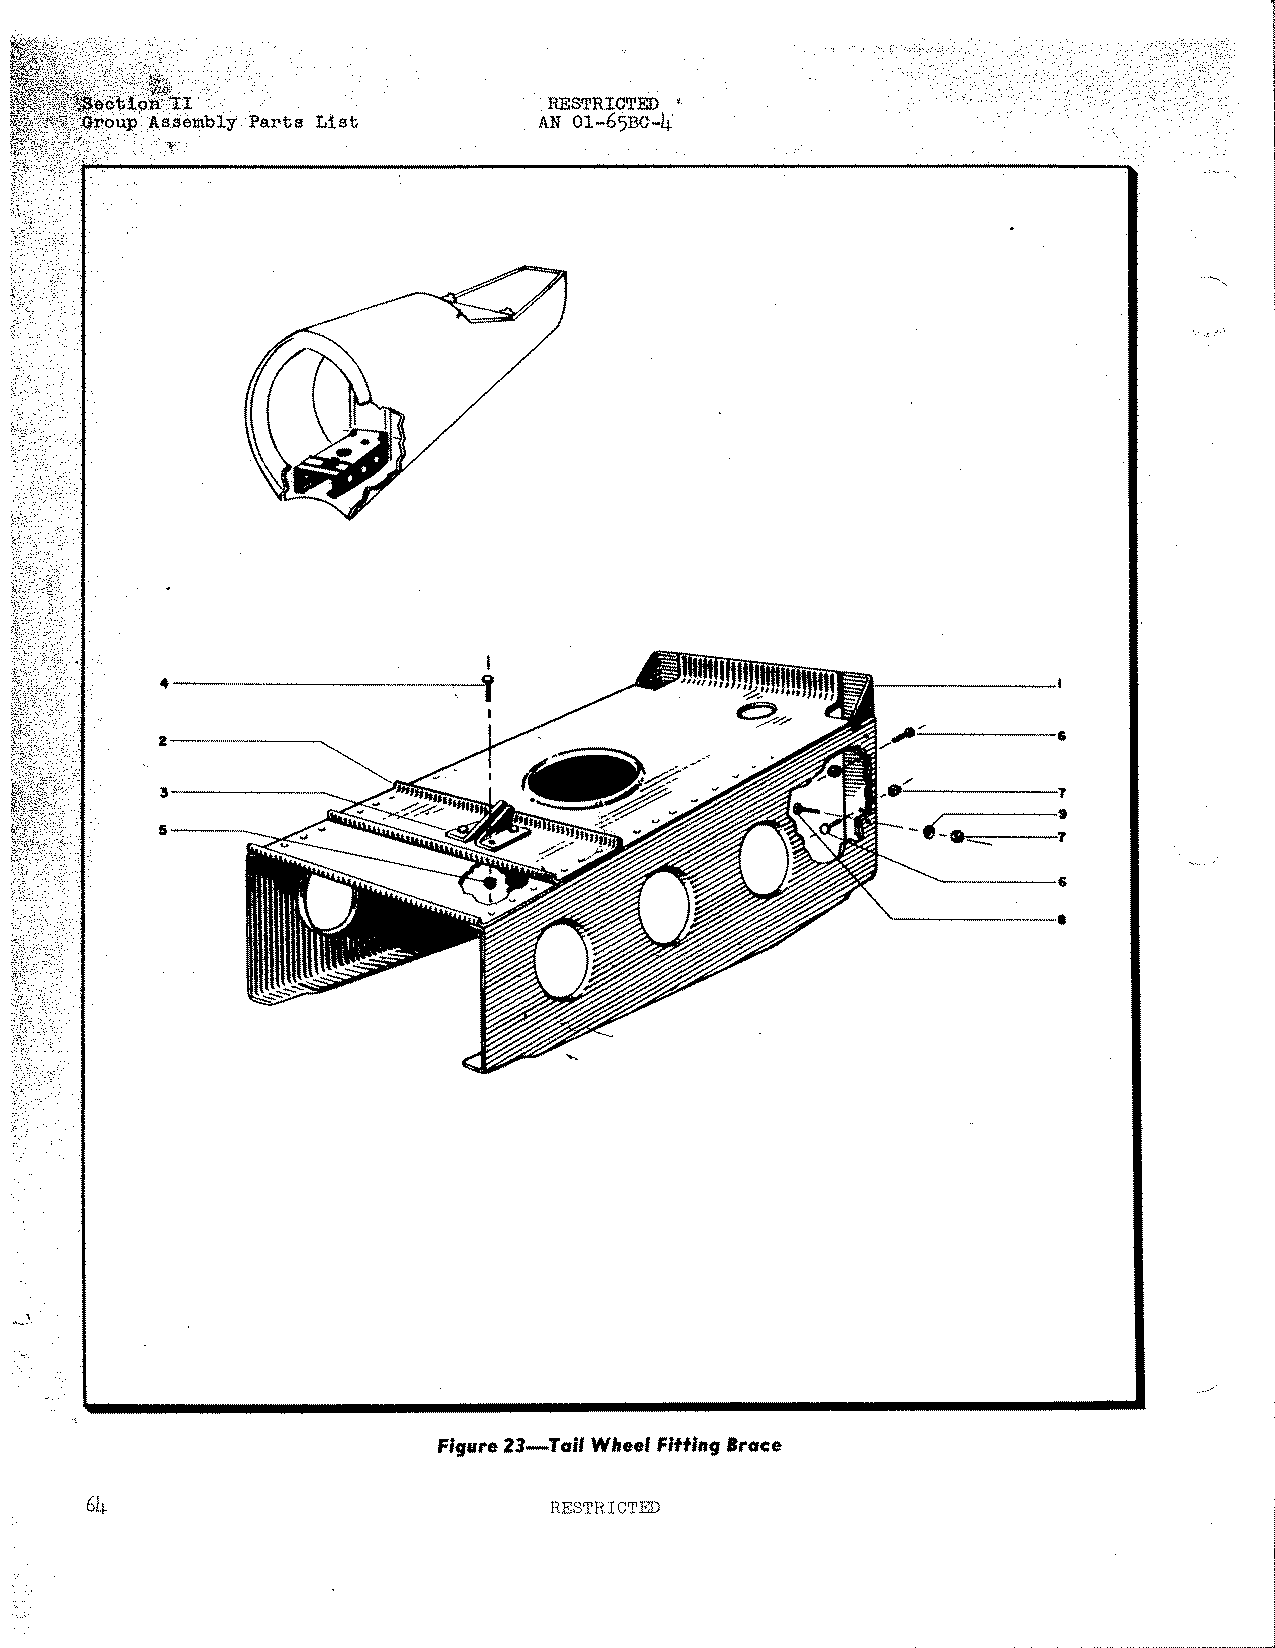 Sample page 70 from AirCorps Library document: Parts Catalog - P-47B, P-47C, P-47D